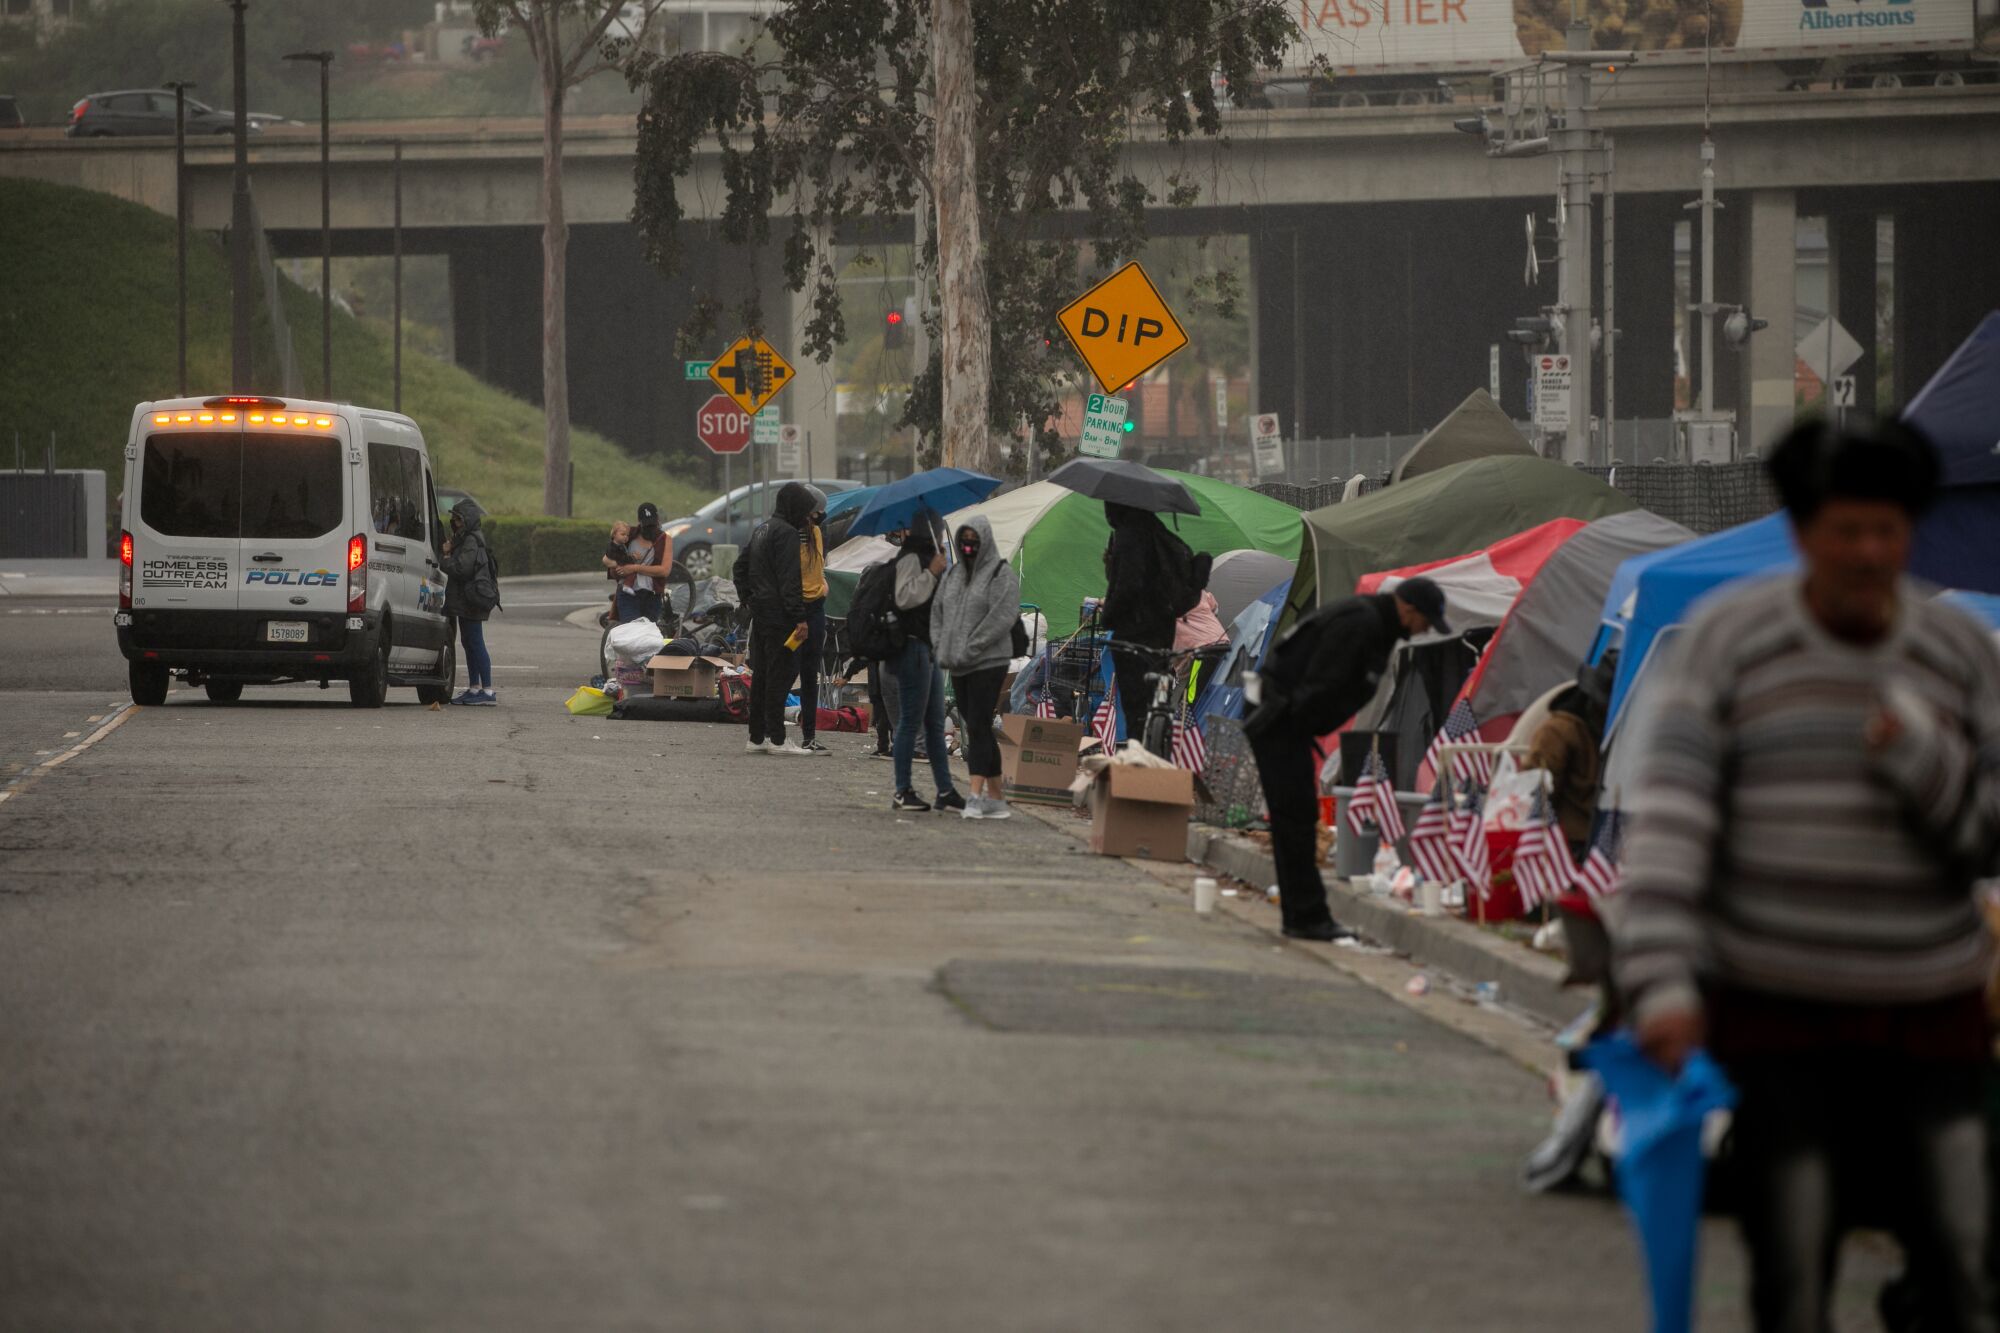 Oceanside Police being clearing a homeless encampment near Oceanside Boulevard on Tuesday.